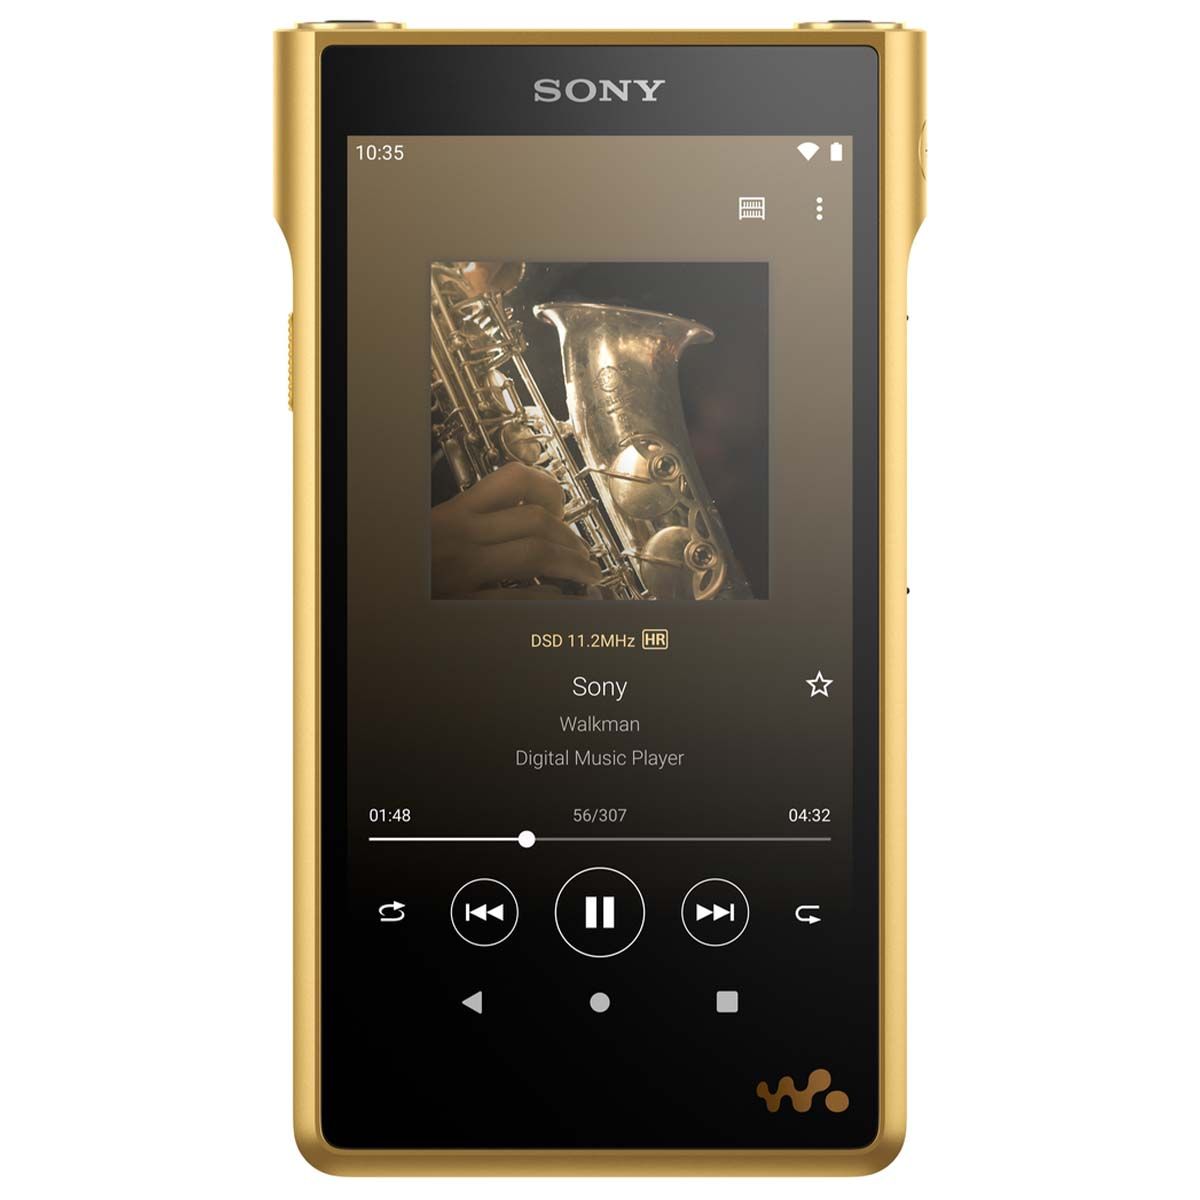 Sony Walkman WM1ZM2 - Signature Series Digital Player - Android 11 - front view with album art